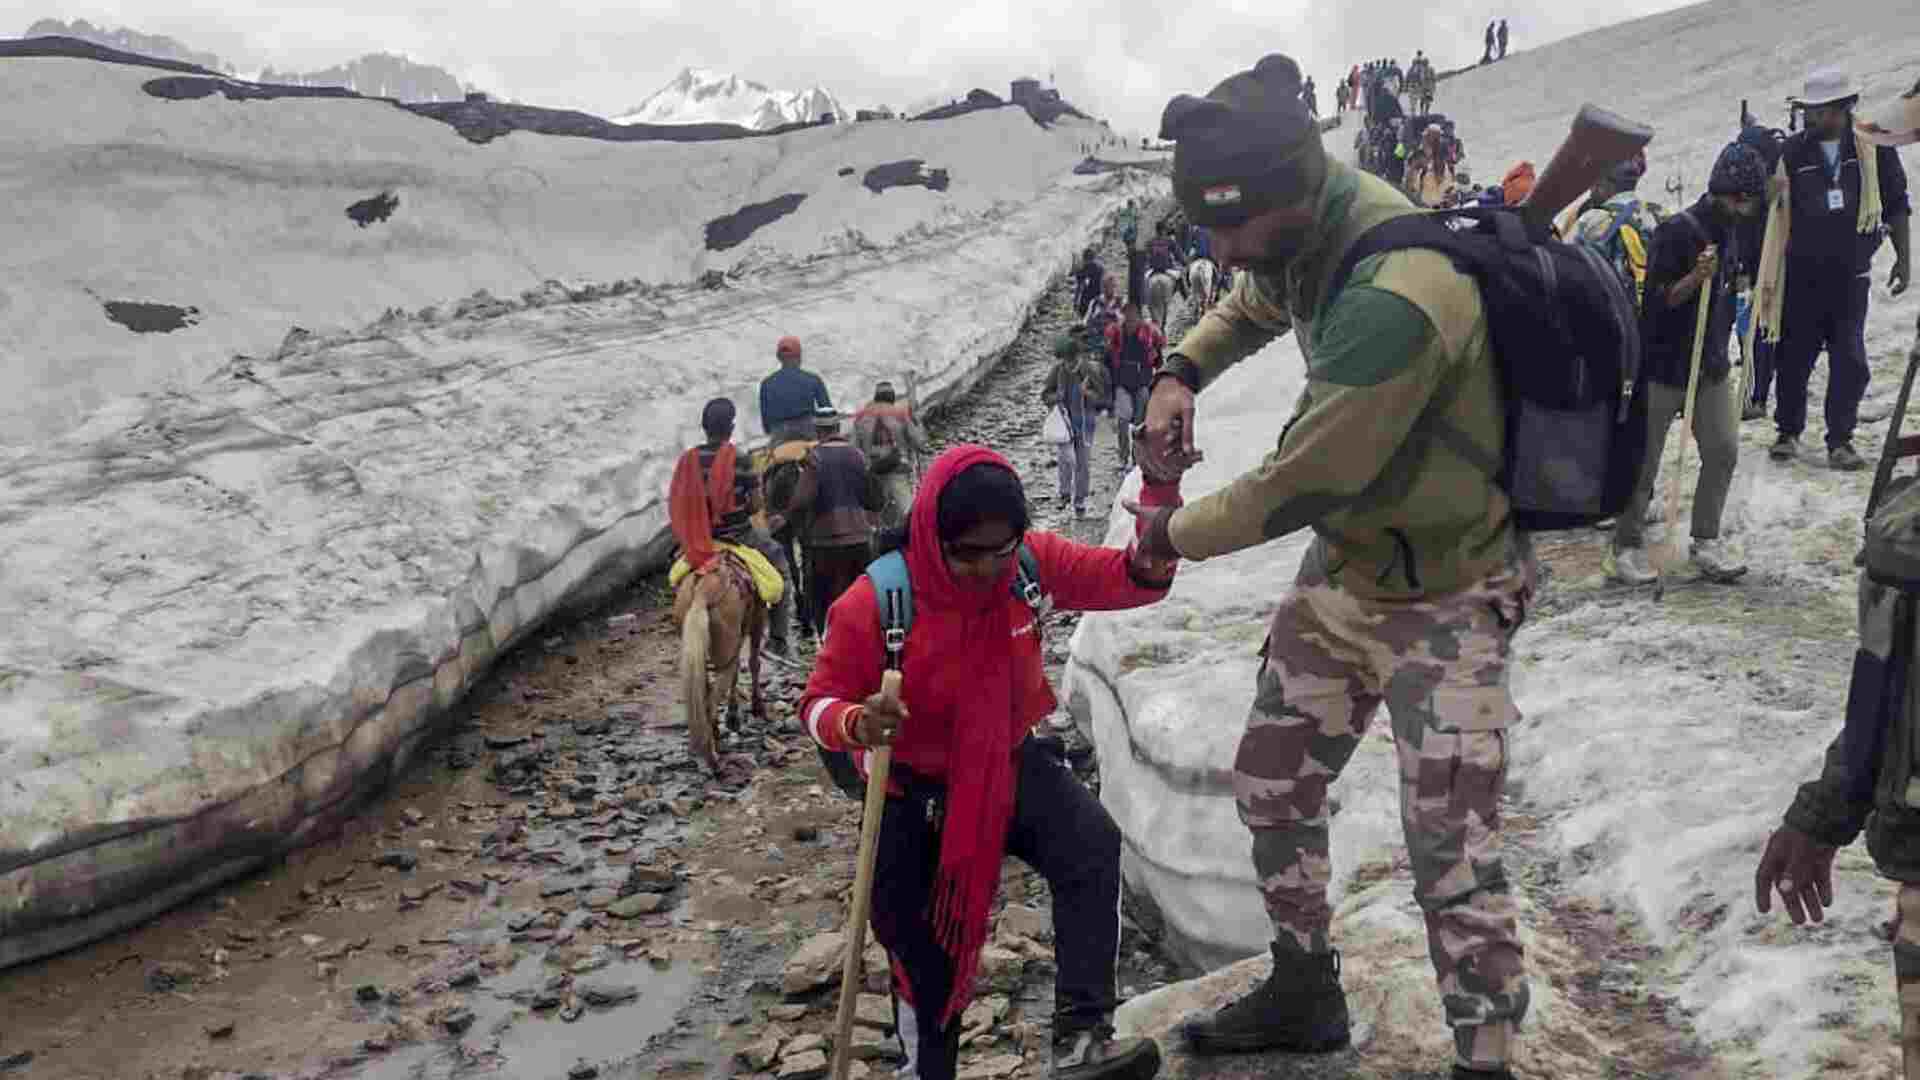 Amarnath Yatra: Health Ministry Gives Support To State Health Services, By Enhancing Staff At Medical Camps